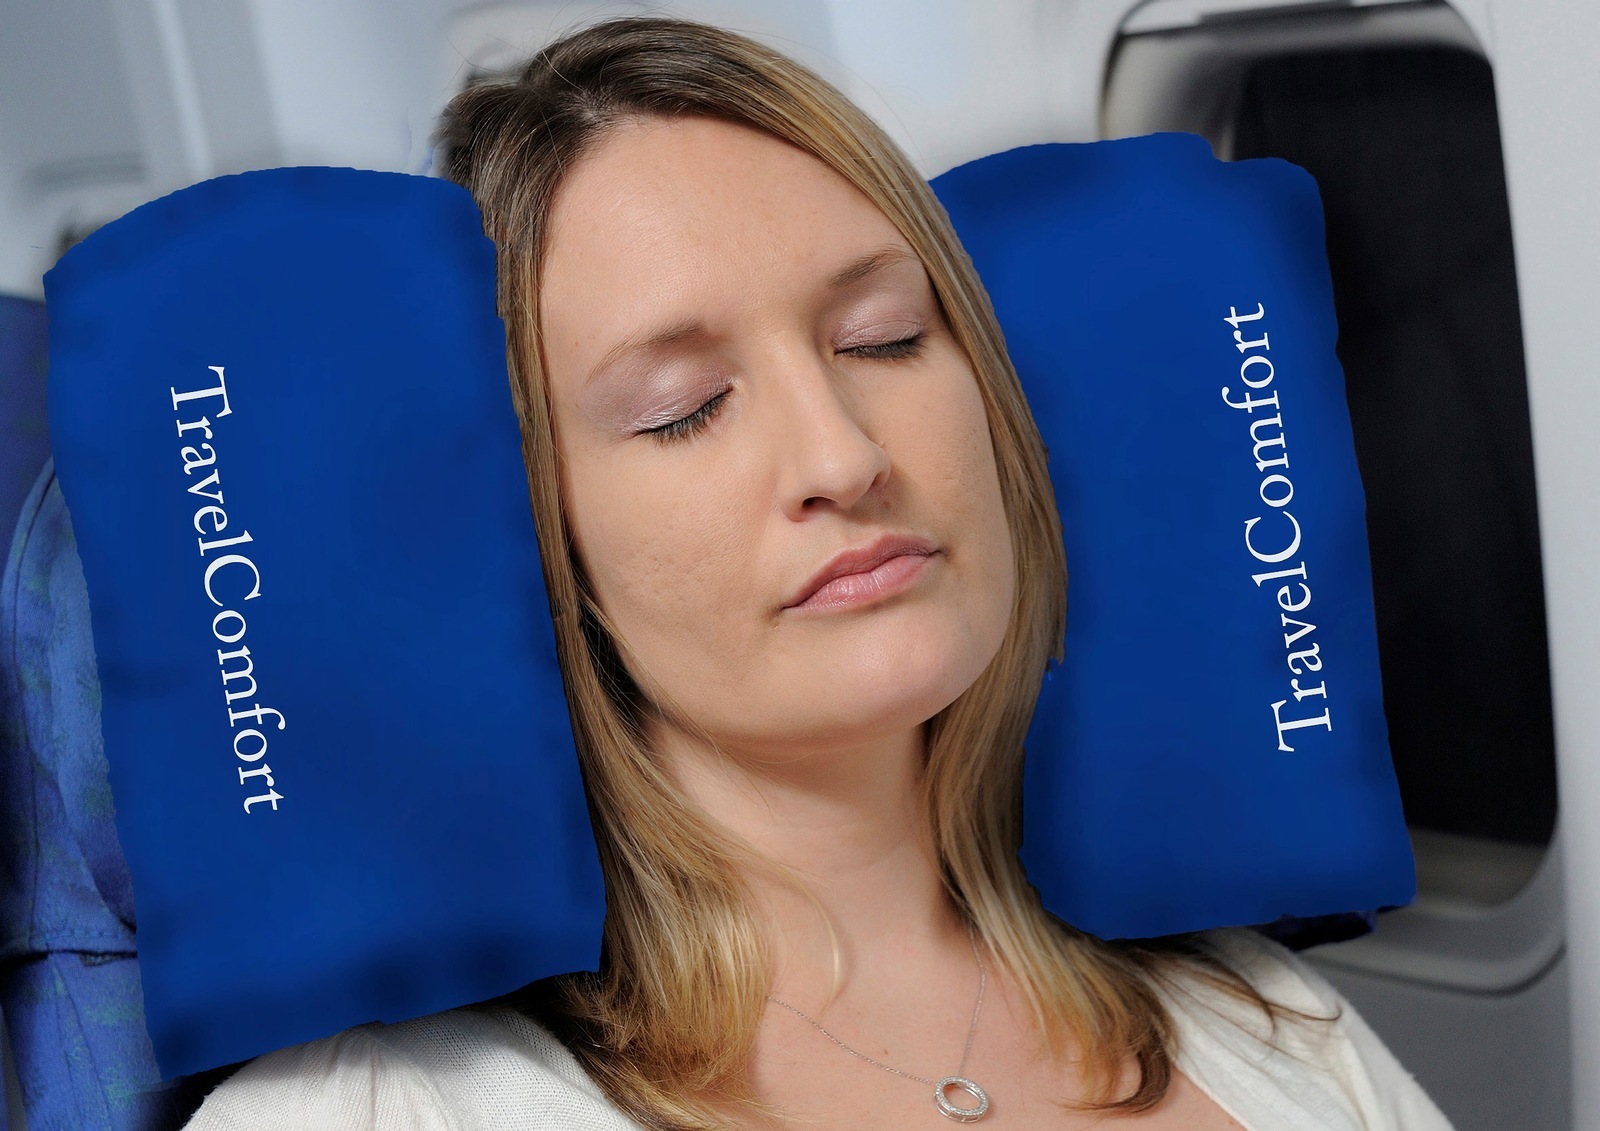 inflatable front travel pillow review